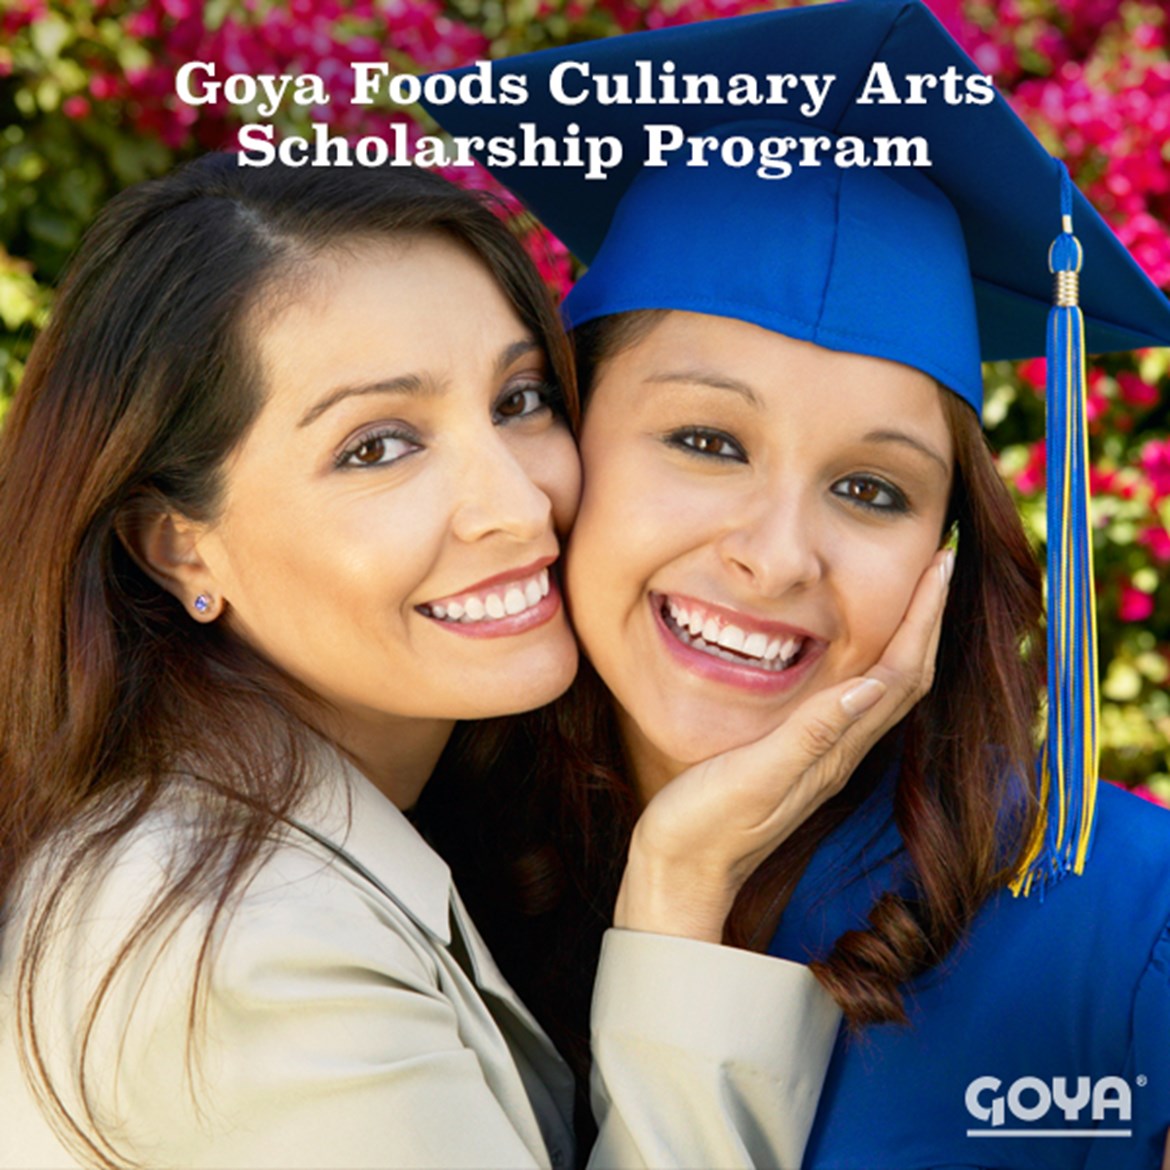 Press Release: Goya Foods Offers Four $20,000 Culinary Arts & Food Science Scholarships to Students Nationwide